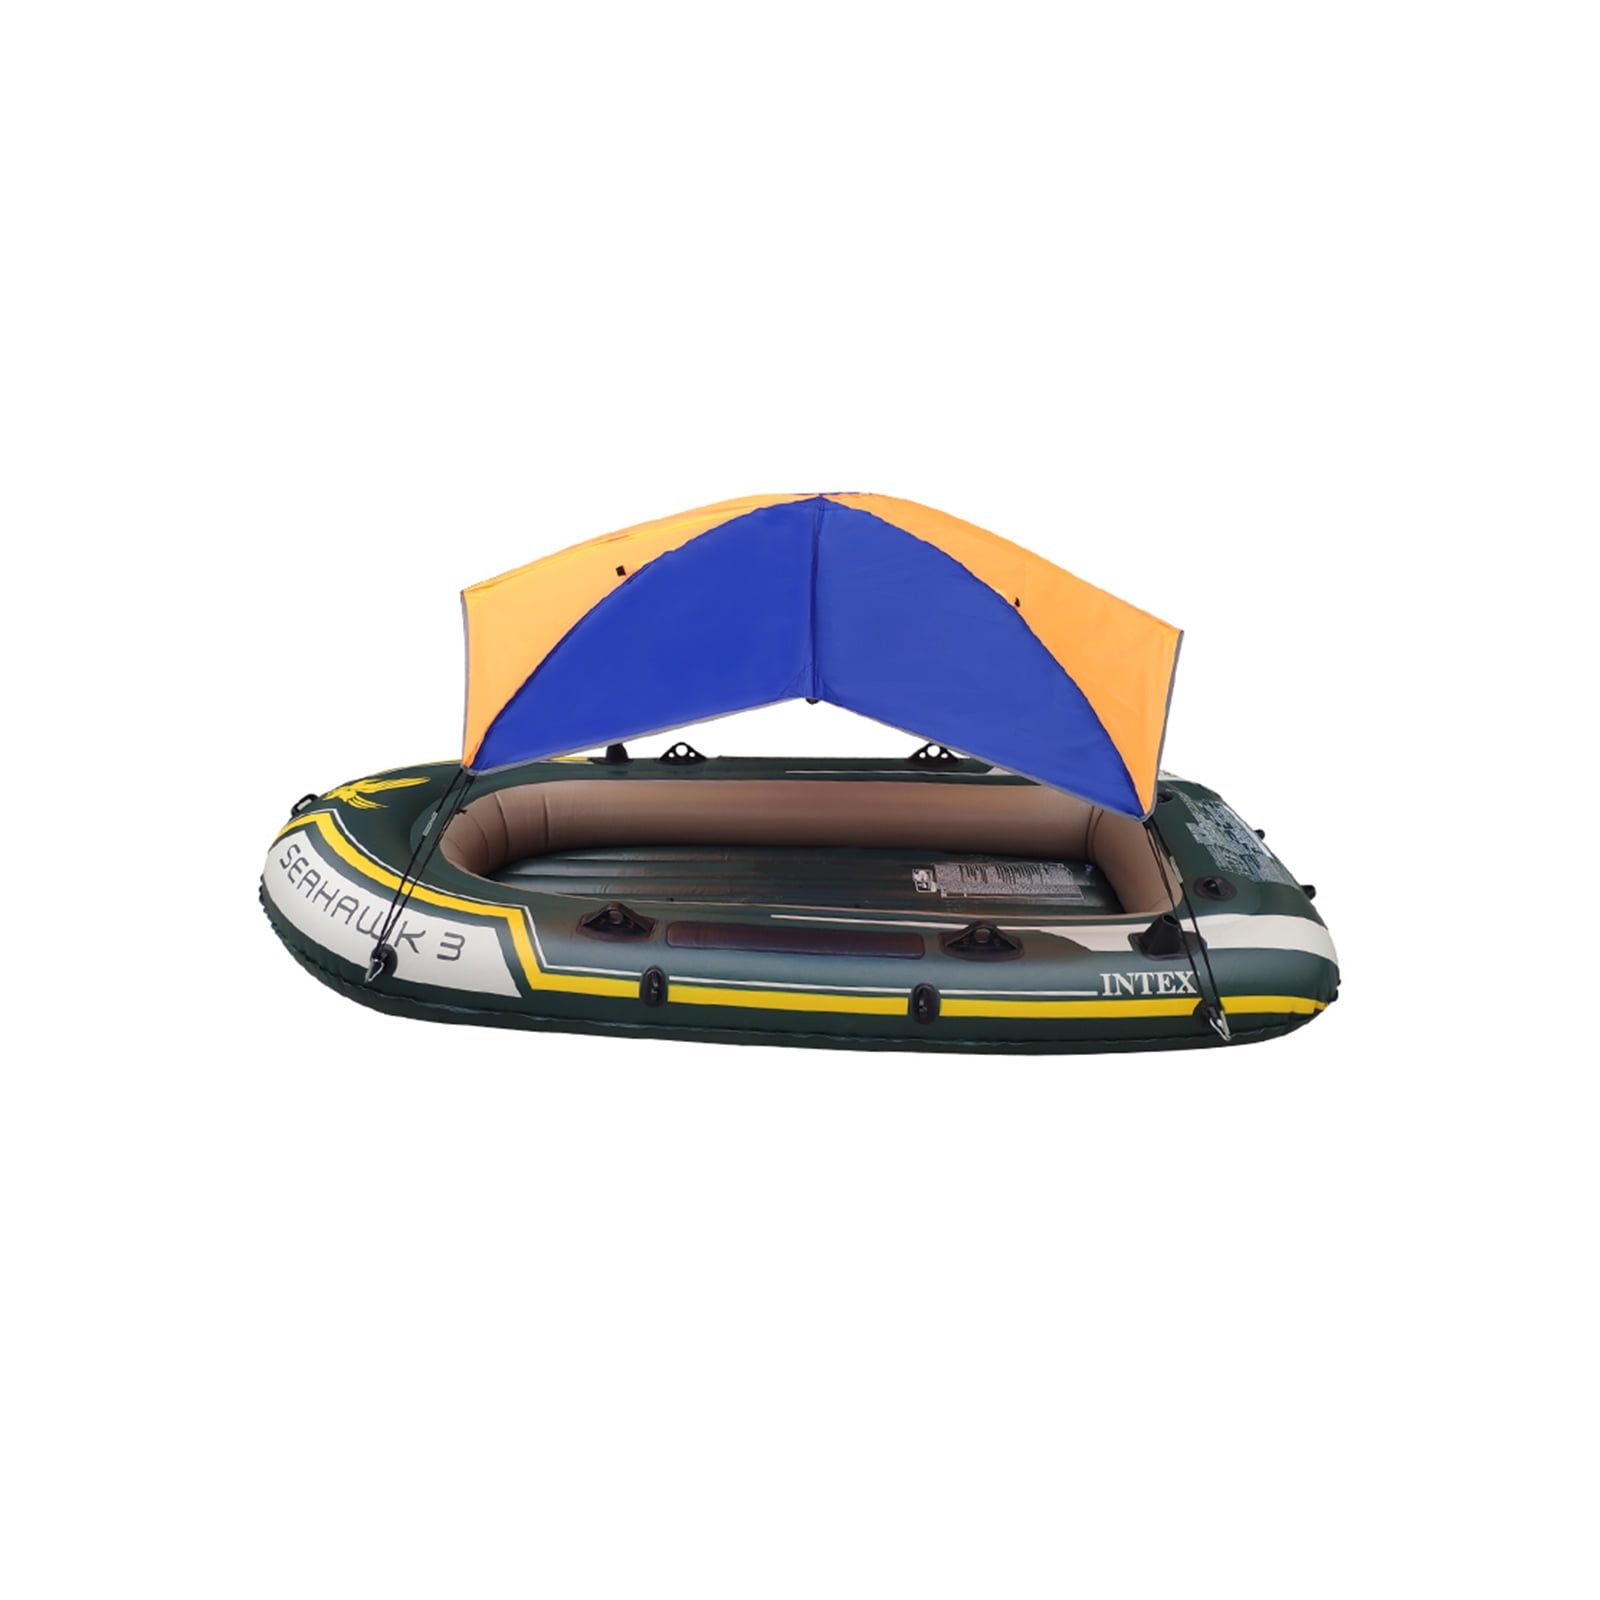 2-4 Person Boat Canopy Sun Shade Inflatable Anti UV Outdoor Awning Tent A6L4 